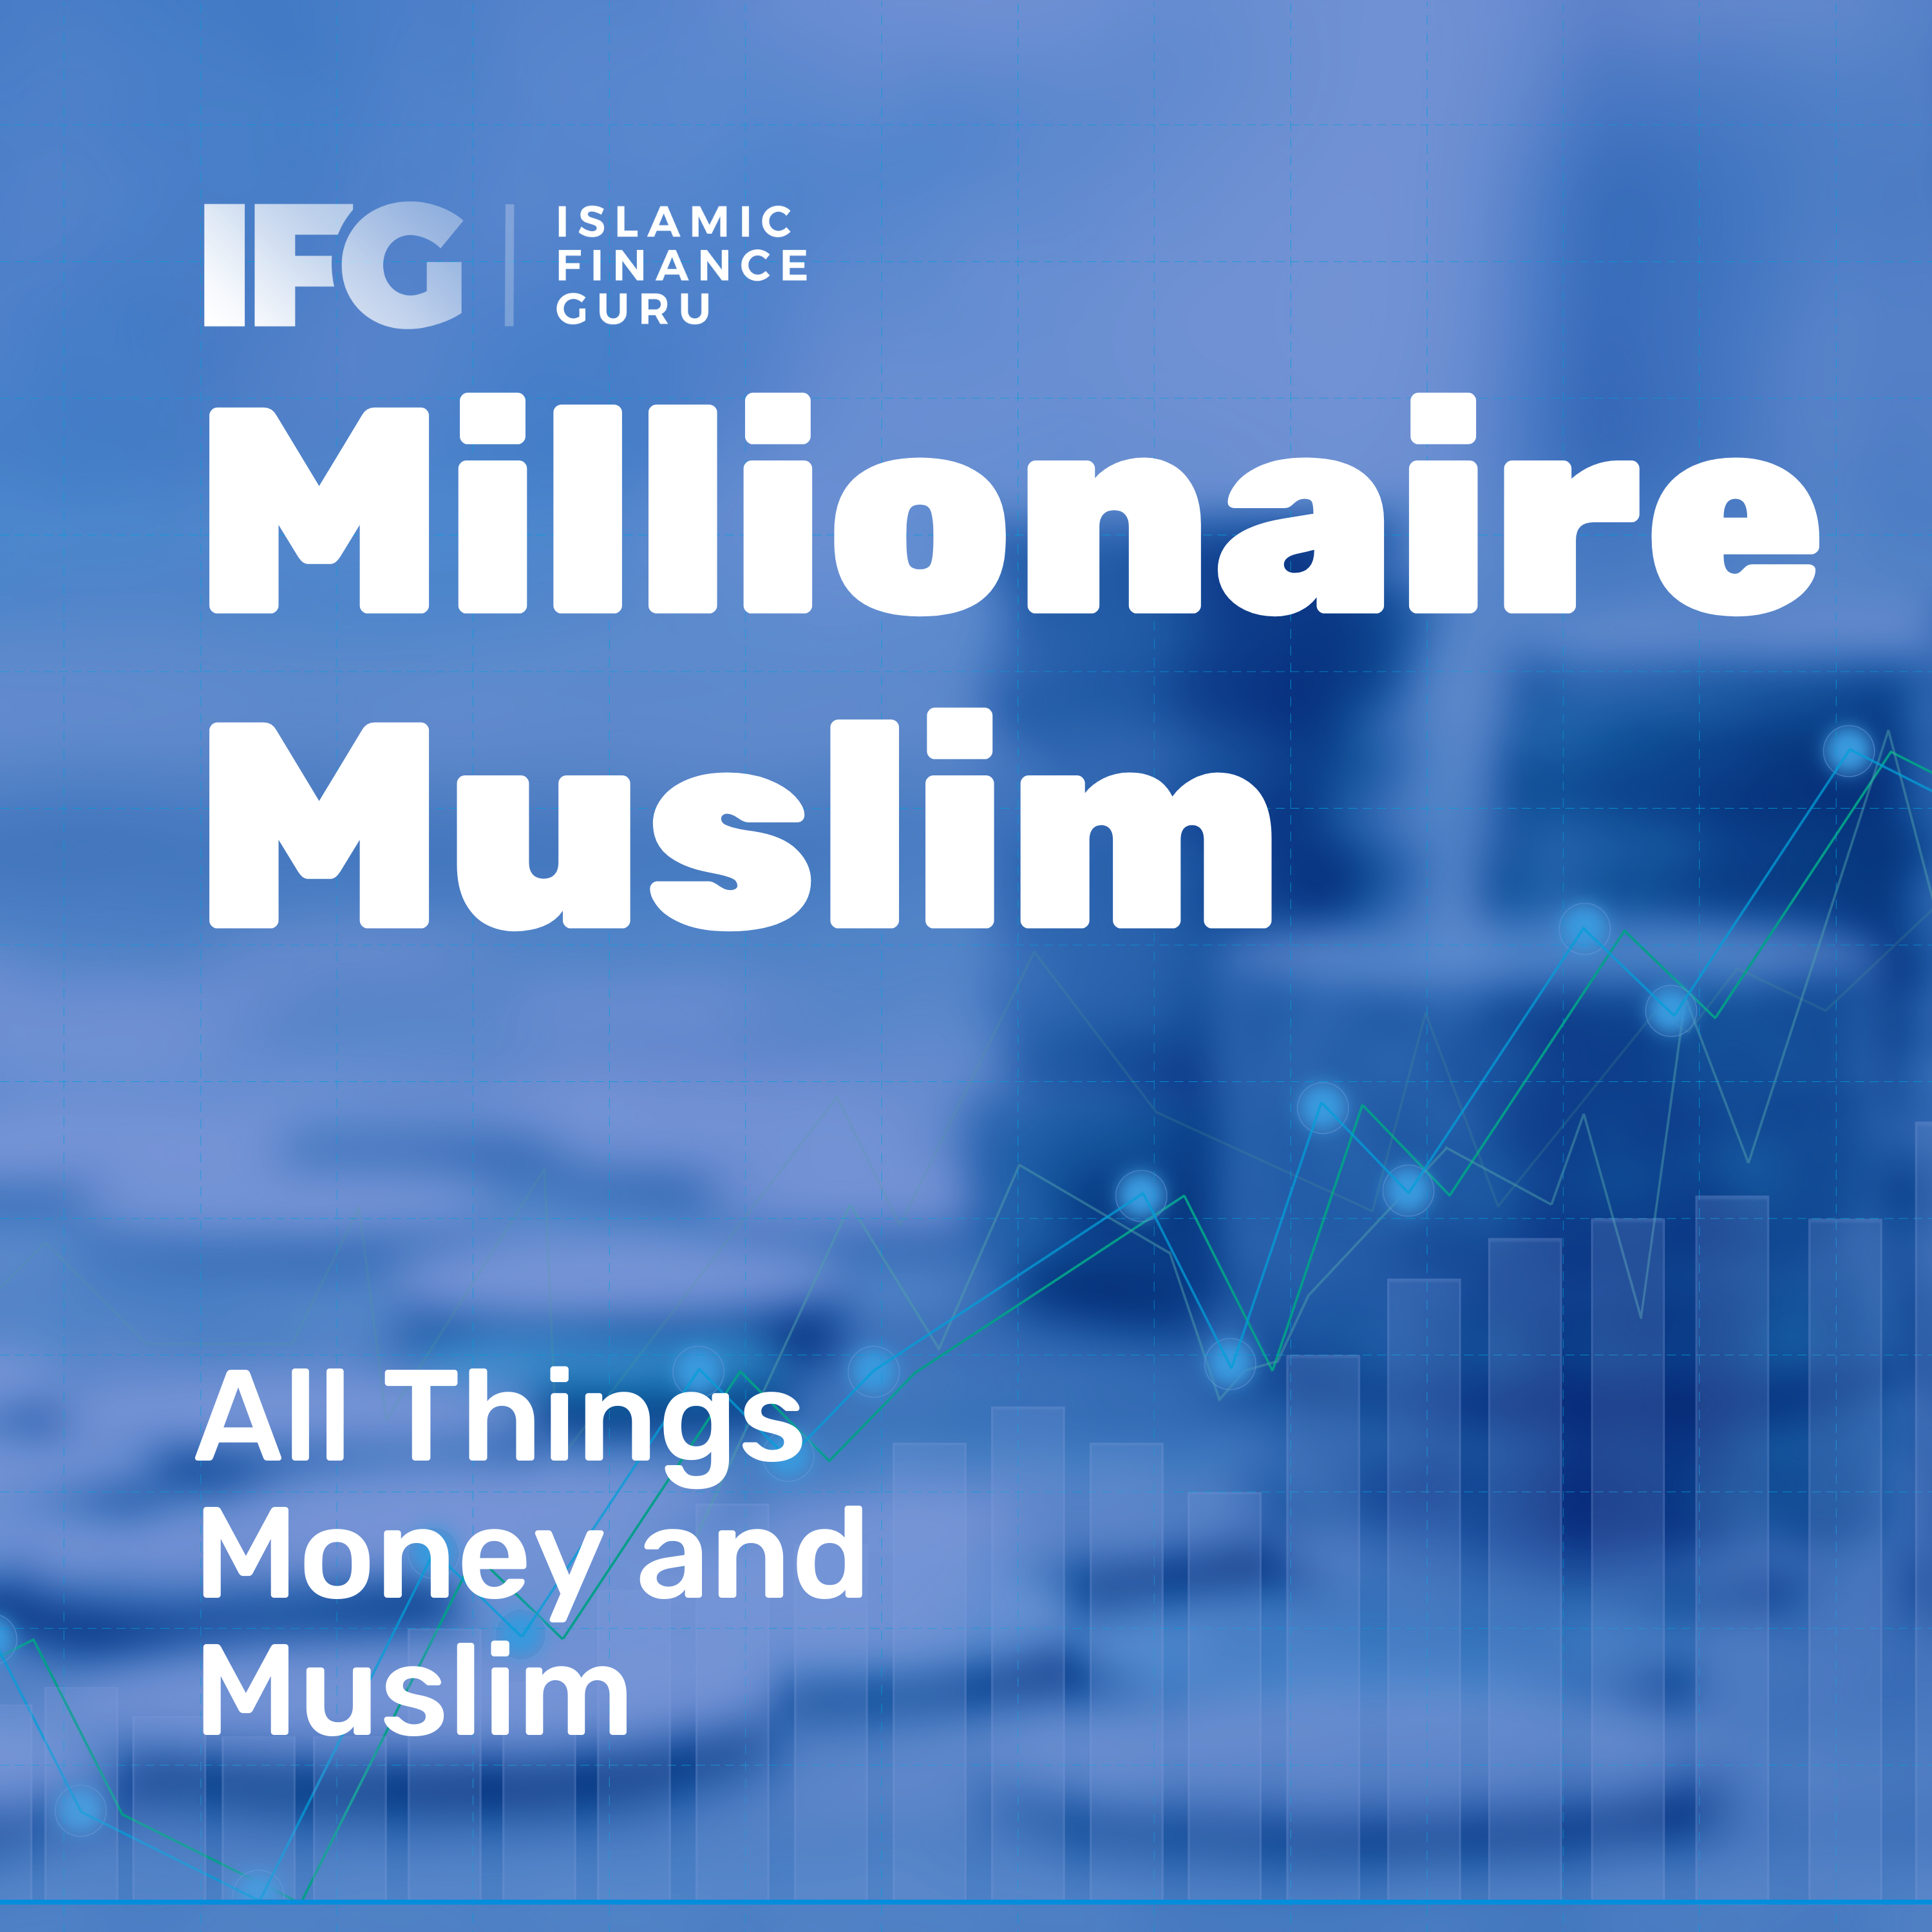 E49 Podcast: Conversation with Mohammed Amin | IFG Featured Image